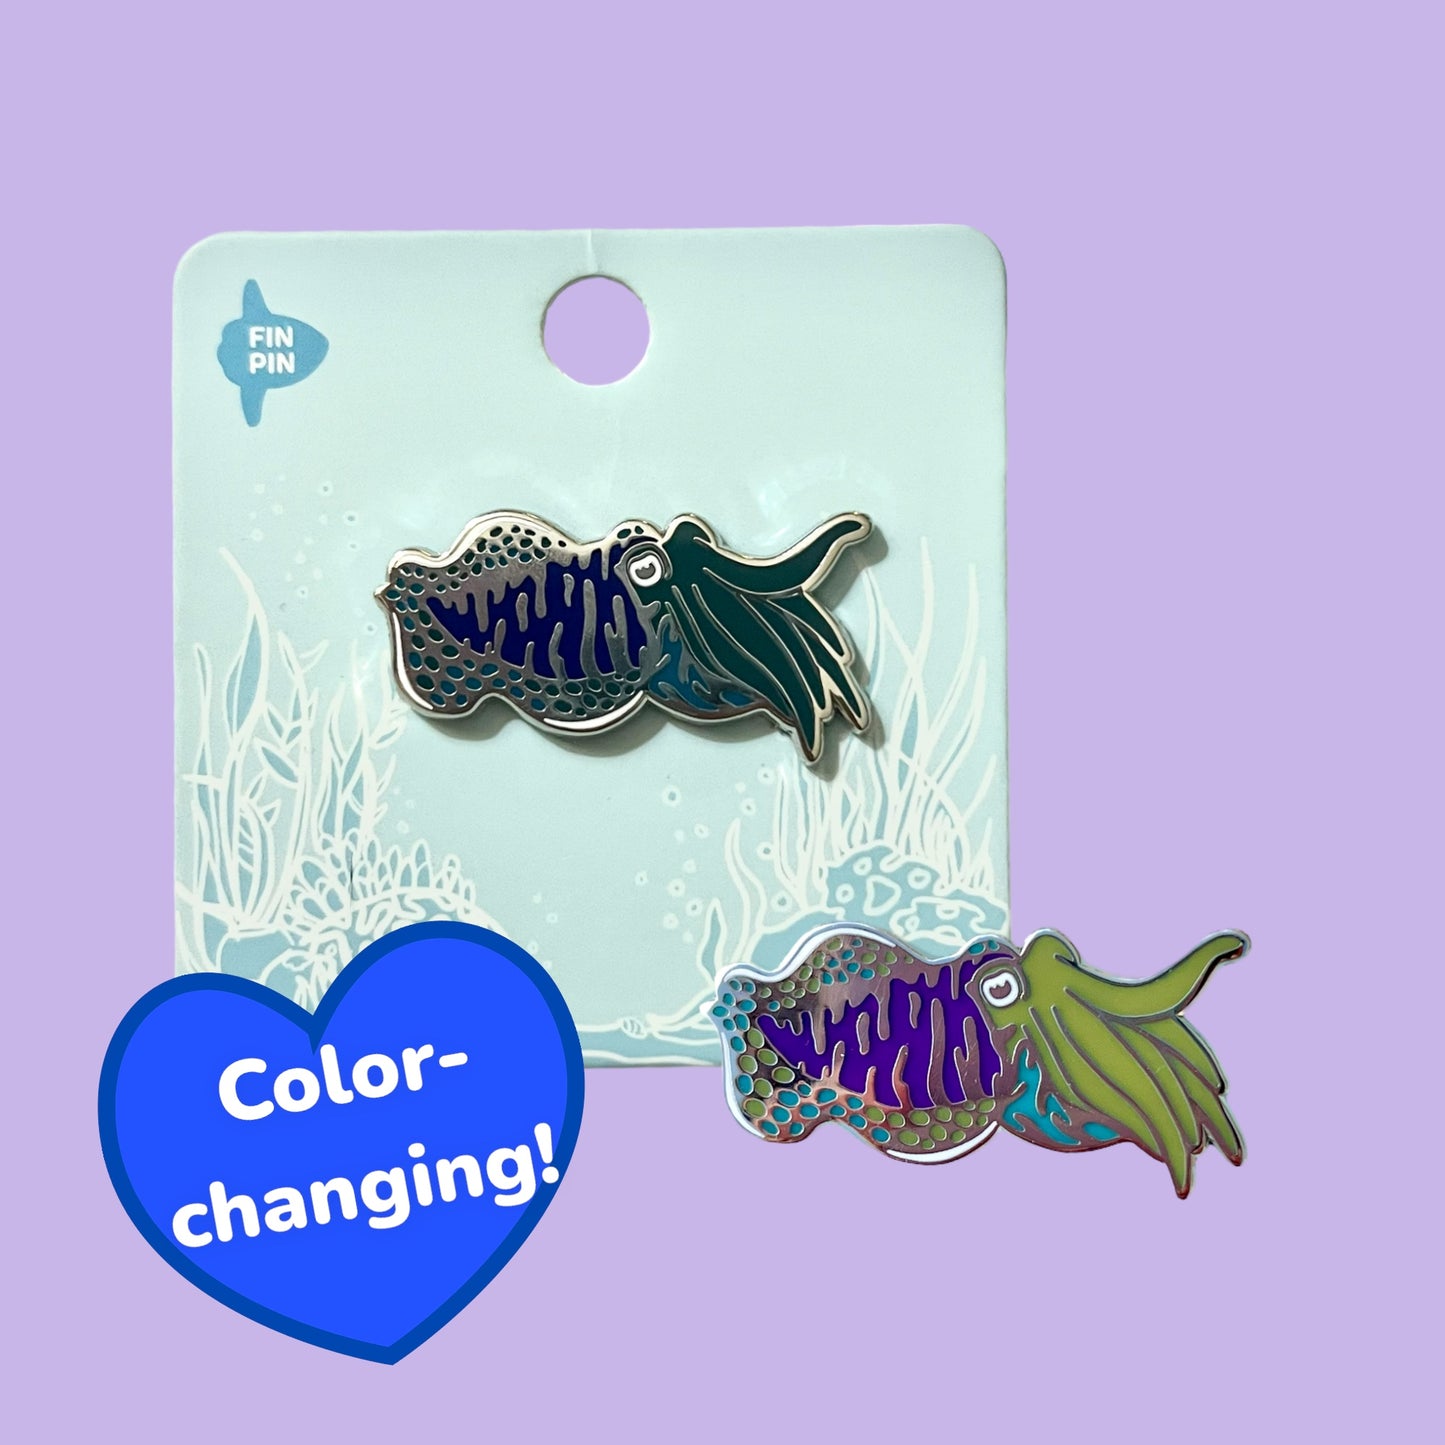 Cuttlefish color-changing enamel pin